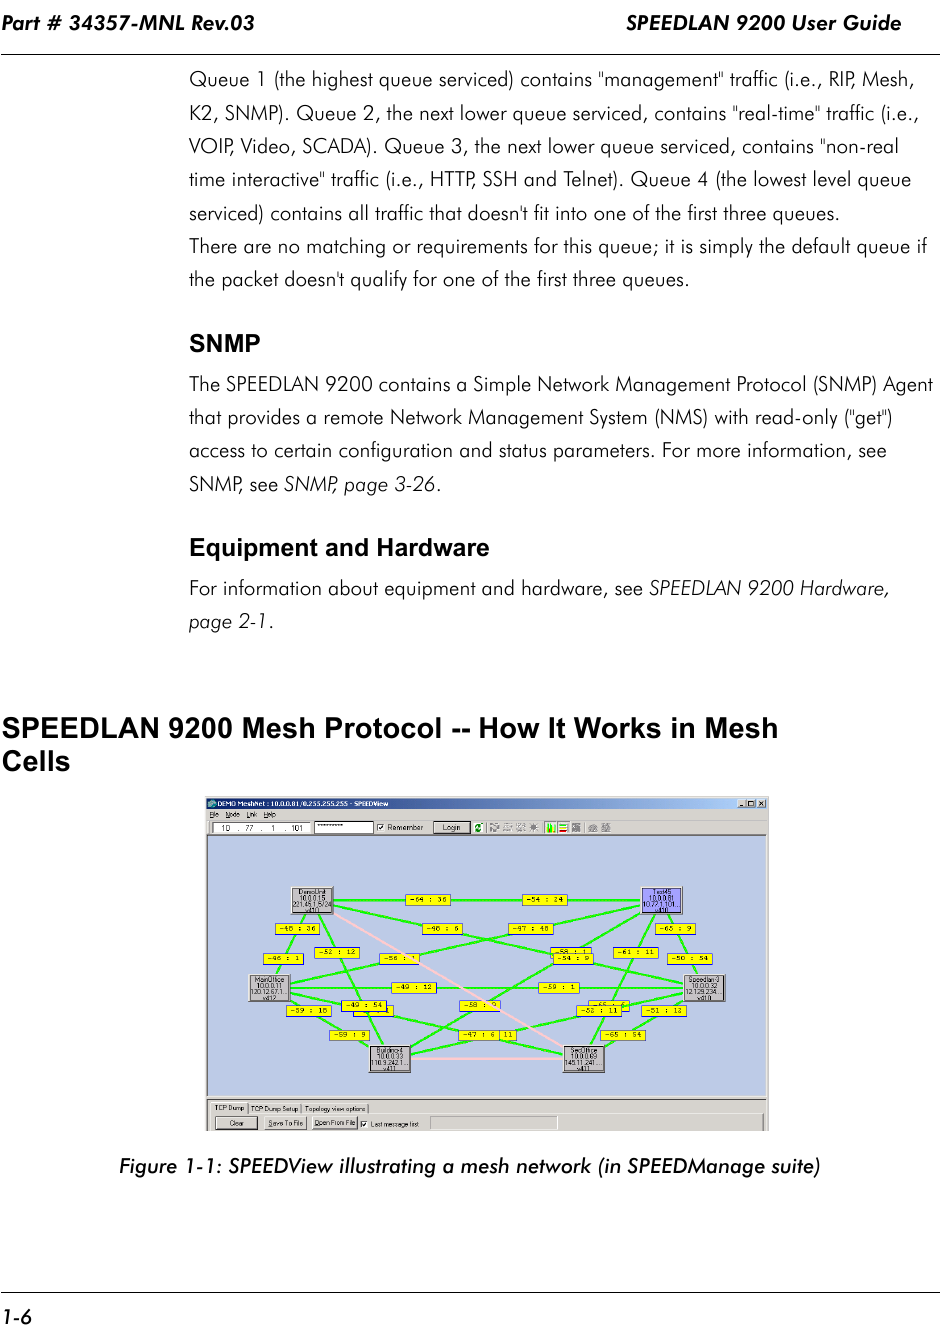 Part # 34357-MNL Rev.03                                                            SPEEDLAN 9200 User Guide 1-6Queue 1 (the highest queue serviced) contains &quot;management&quot; traffic (i.e., RIP, Mesh, K2, SNMP). Queue 2, the next lower queue serviced, contains &quot;real-time&quot; traffic (i.e., VOIP, Video, SCADA). Queue 3, the next lower queue serviced, contains &quot;non-real time interactive&quot; traffic (i.e., HTTP, SSH and Telnet). Queue 4 (the lowest level queue serviced) contains all traffic that doesn&apos;t fit into one of the first three queues. There are no matching or requirements for this queue; it is simply the default queue if the packet doesn&apos;t qualify for one of the first three queues.SNMPThe SPEEDLAN 9200 contains a Simple Network Management Protocol (SNMP) Agent that provides a remote Network Management System (NMS) with read-only (&quot;get&quot;) access to certain configuration and status parameters. For more information, see SNMP, see SNMP, page 3-26.Equipment and HardwareFor information about equipment and hardware, see SPEEDLAN 9200 Hardware, page 2-1.SPEEDLAN 9200 Mesh Protocol -- How It Works in Mesh CellsFigure 1-1: SPEEDView illustrating a mesh network (in SPEEDManage suite)